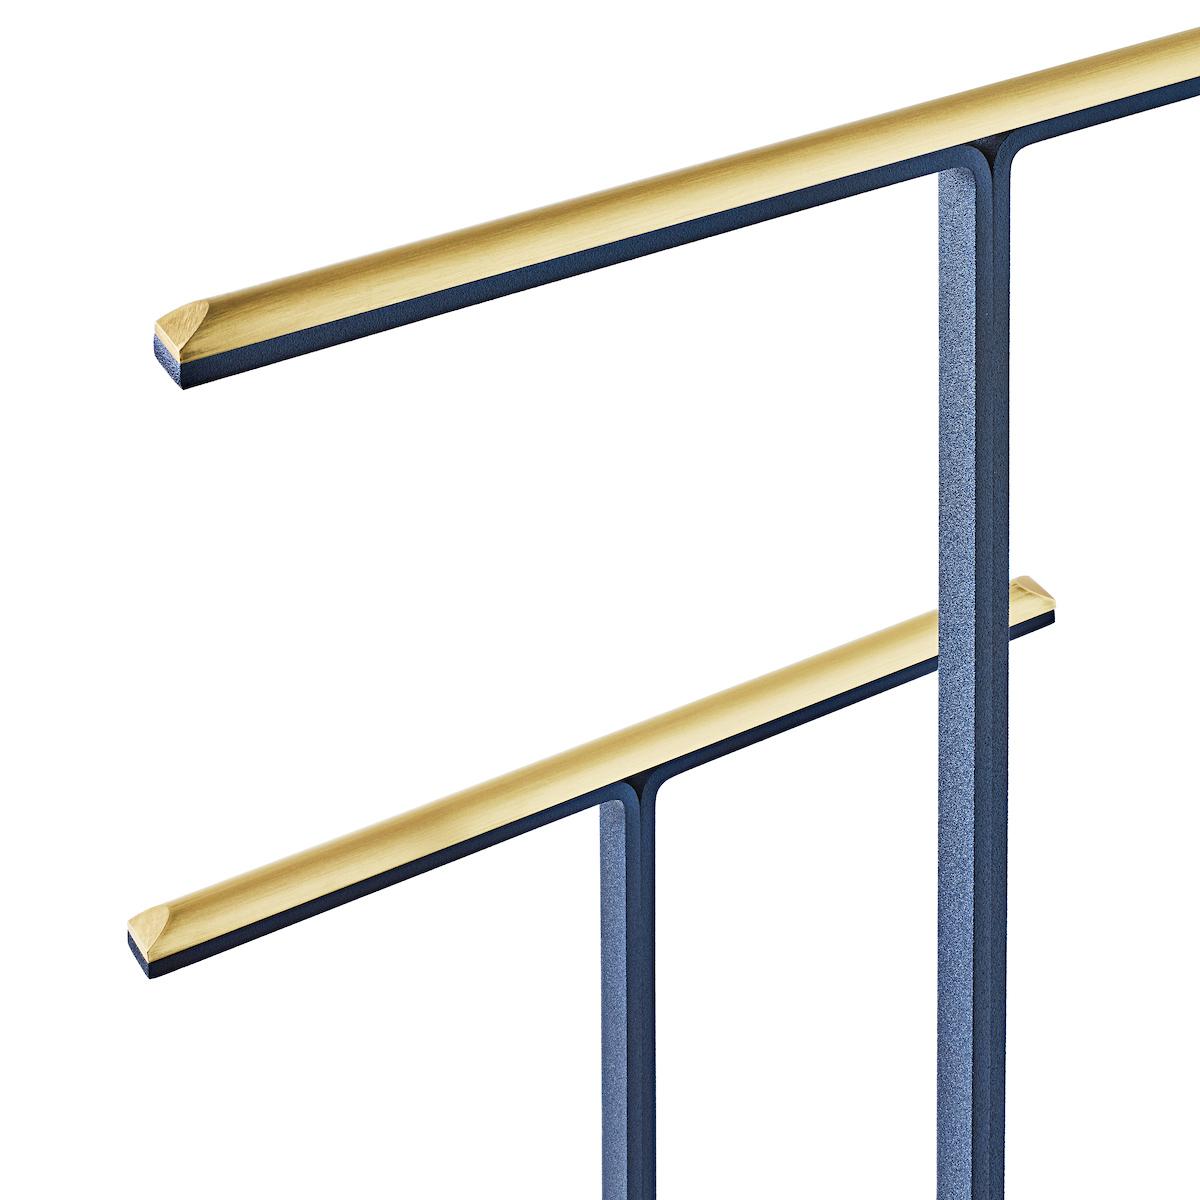 The Valet stand is made by bending and joining two steel profiles and fusing them to a 1/4